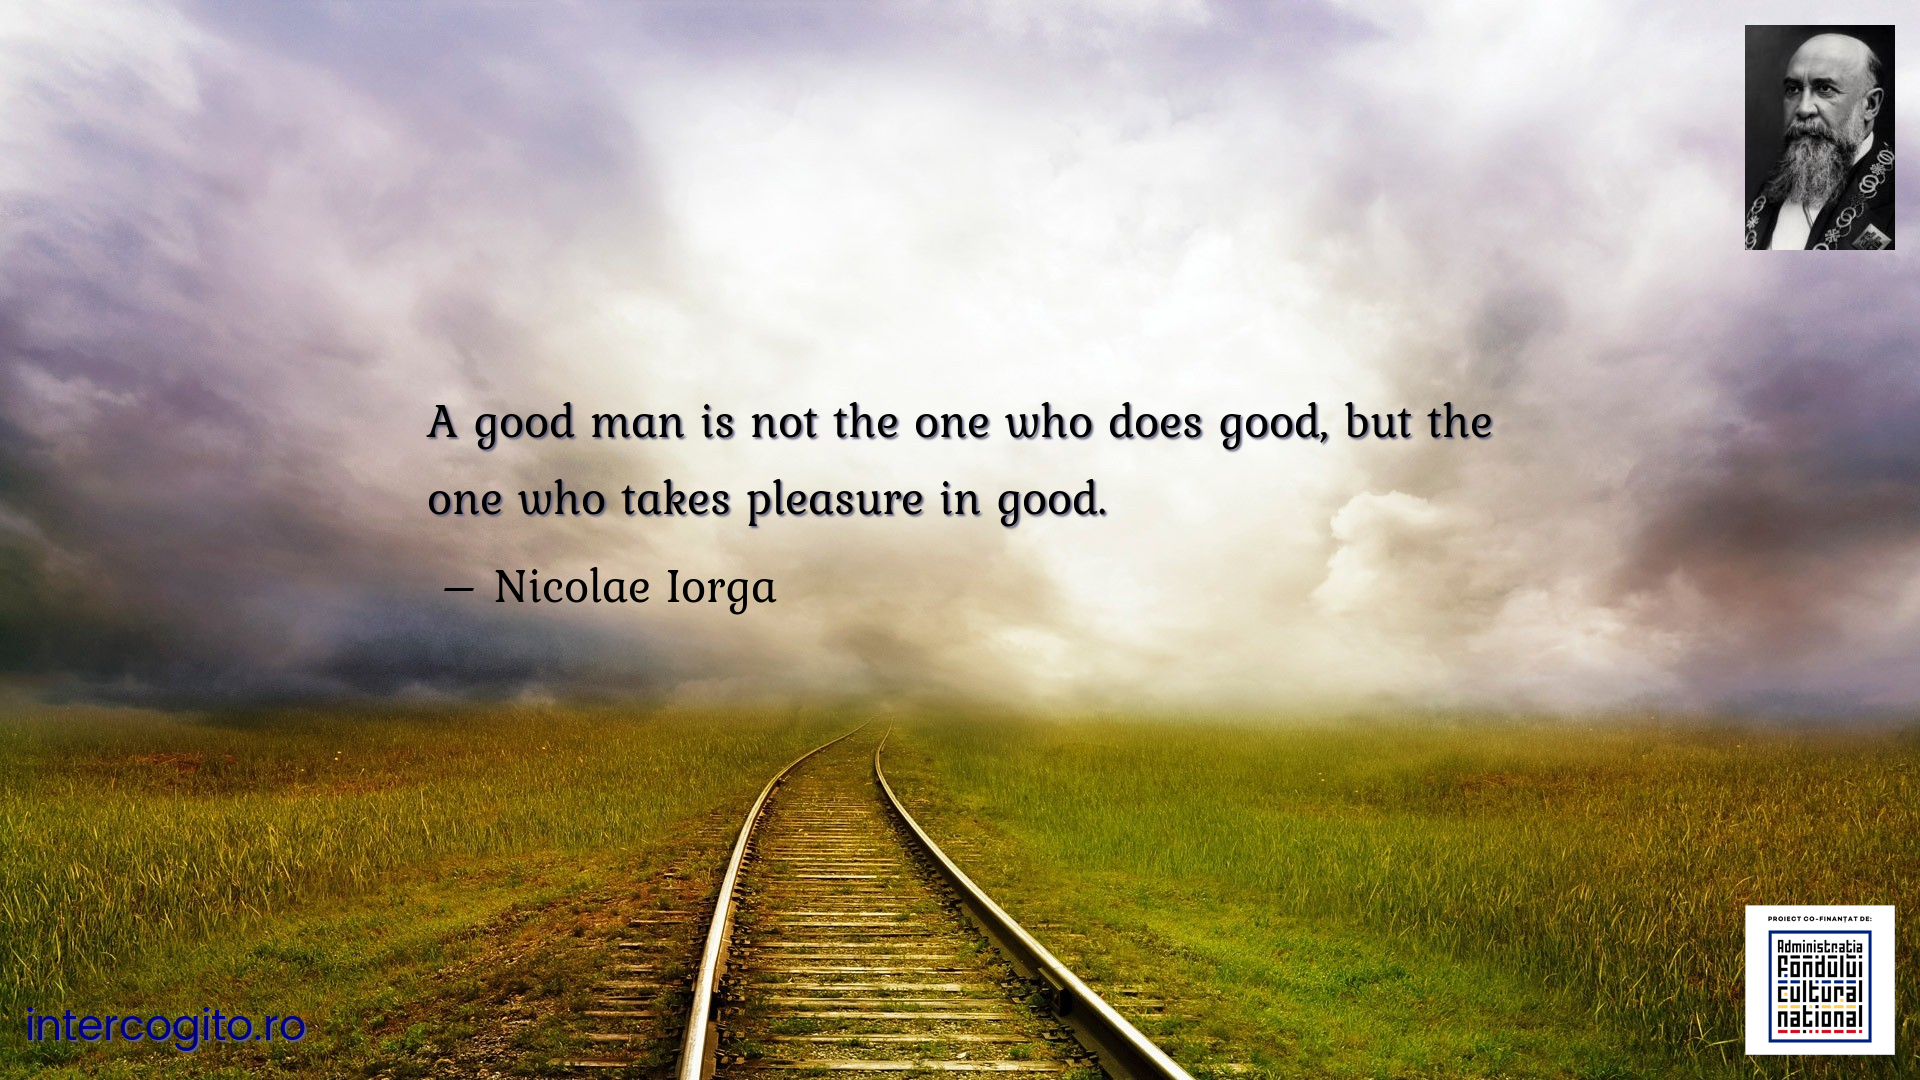 A good man is not the one who does good, but the one who takes pleasure in good.